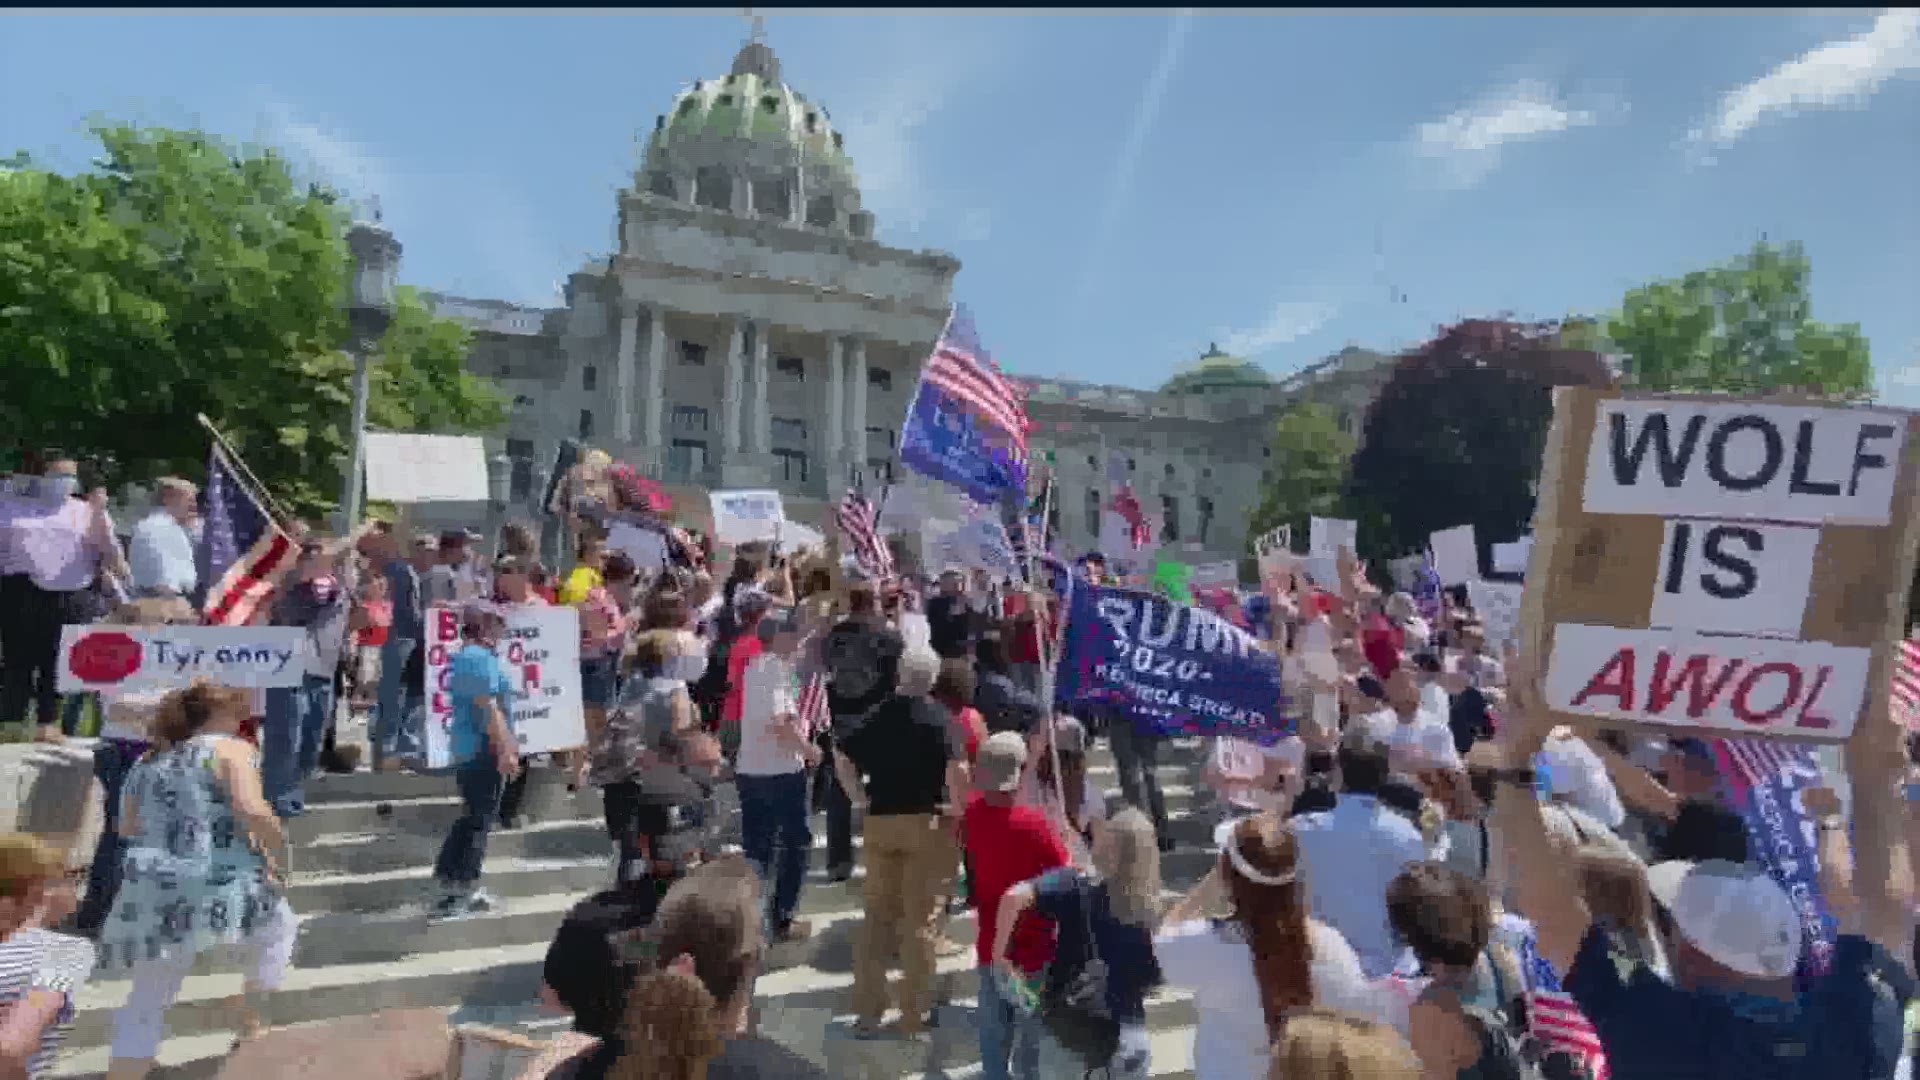 Protestors want PA to 'reopen'